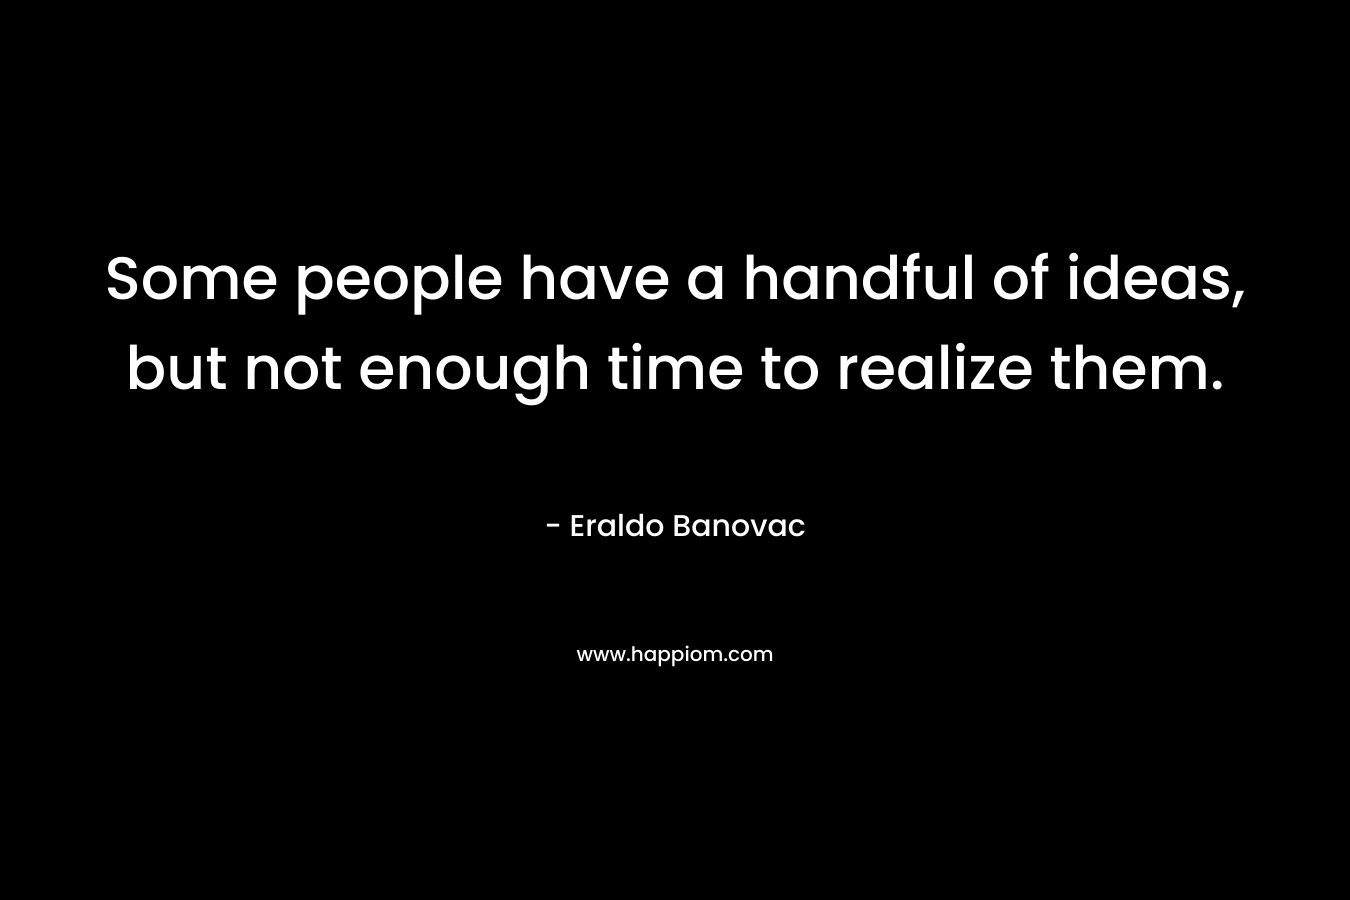 Some people have a handful of ideas, but not enough time to realize them.